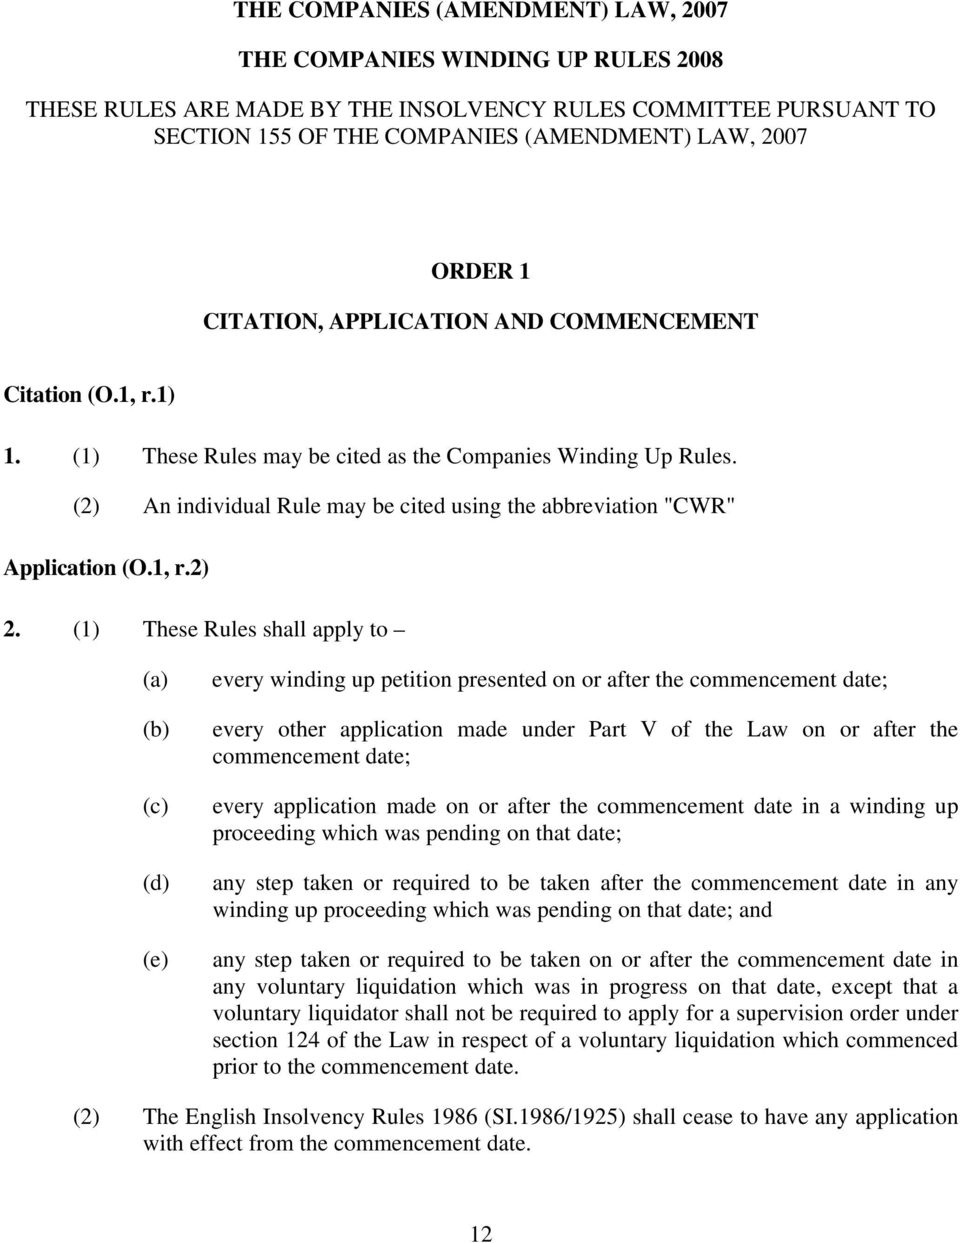 (2) An individual Rule may be cited using the abbreviation "CWR" Application (O.1, r.2) 2.